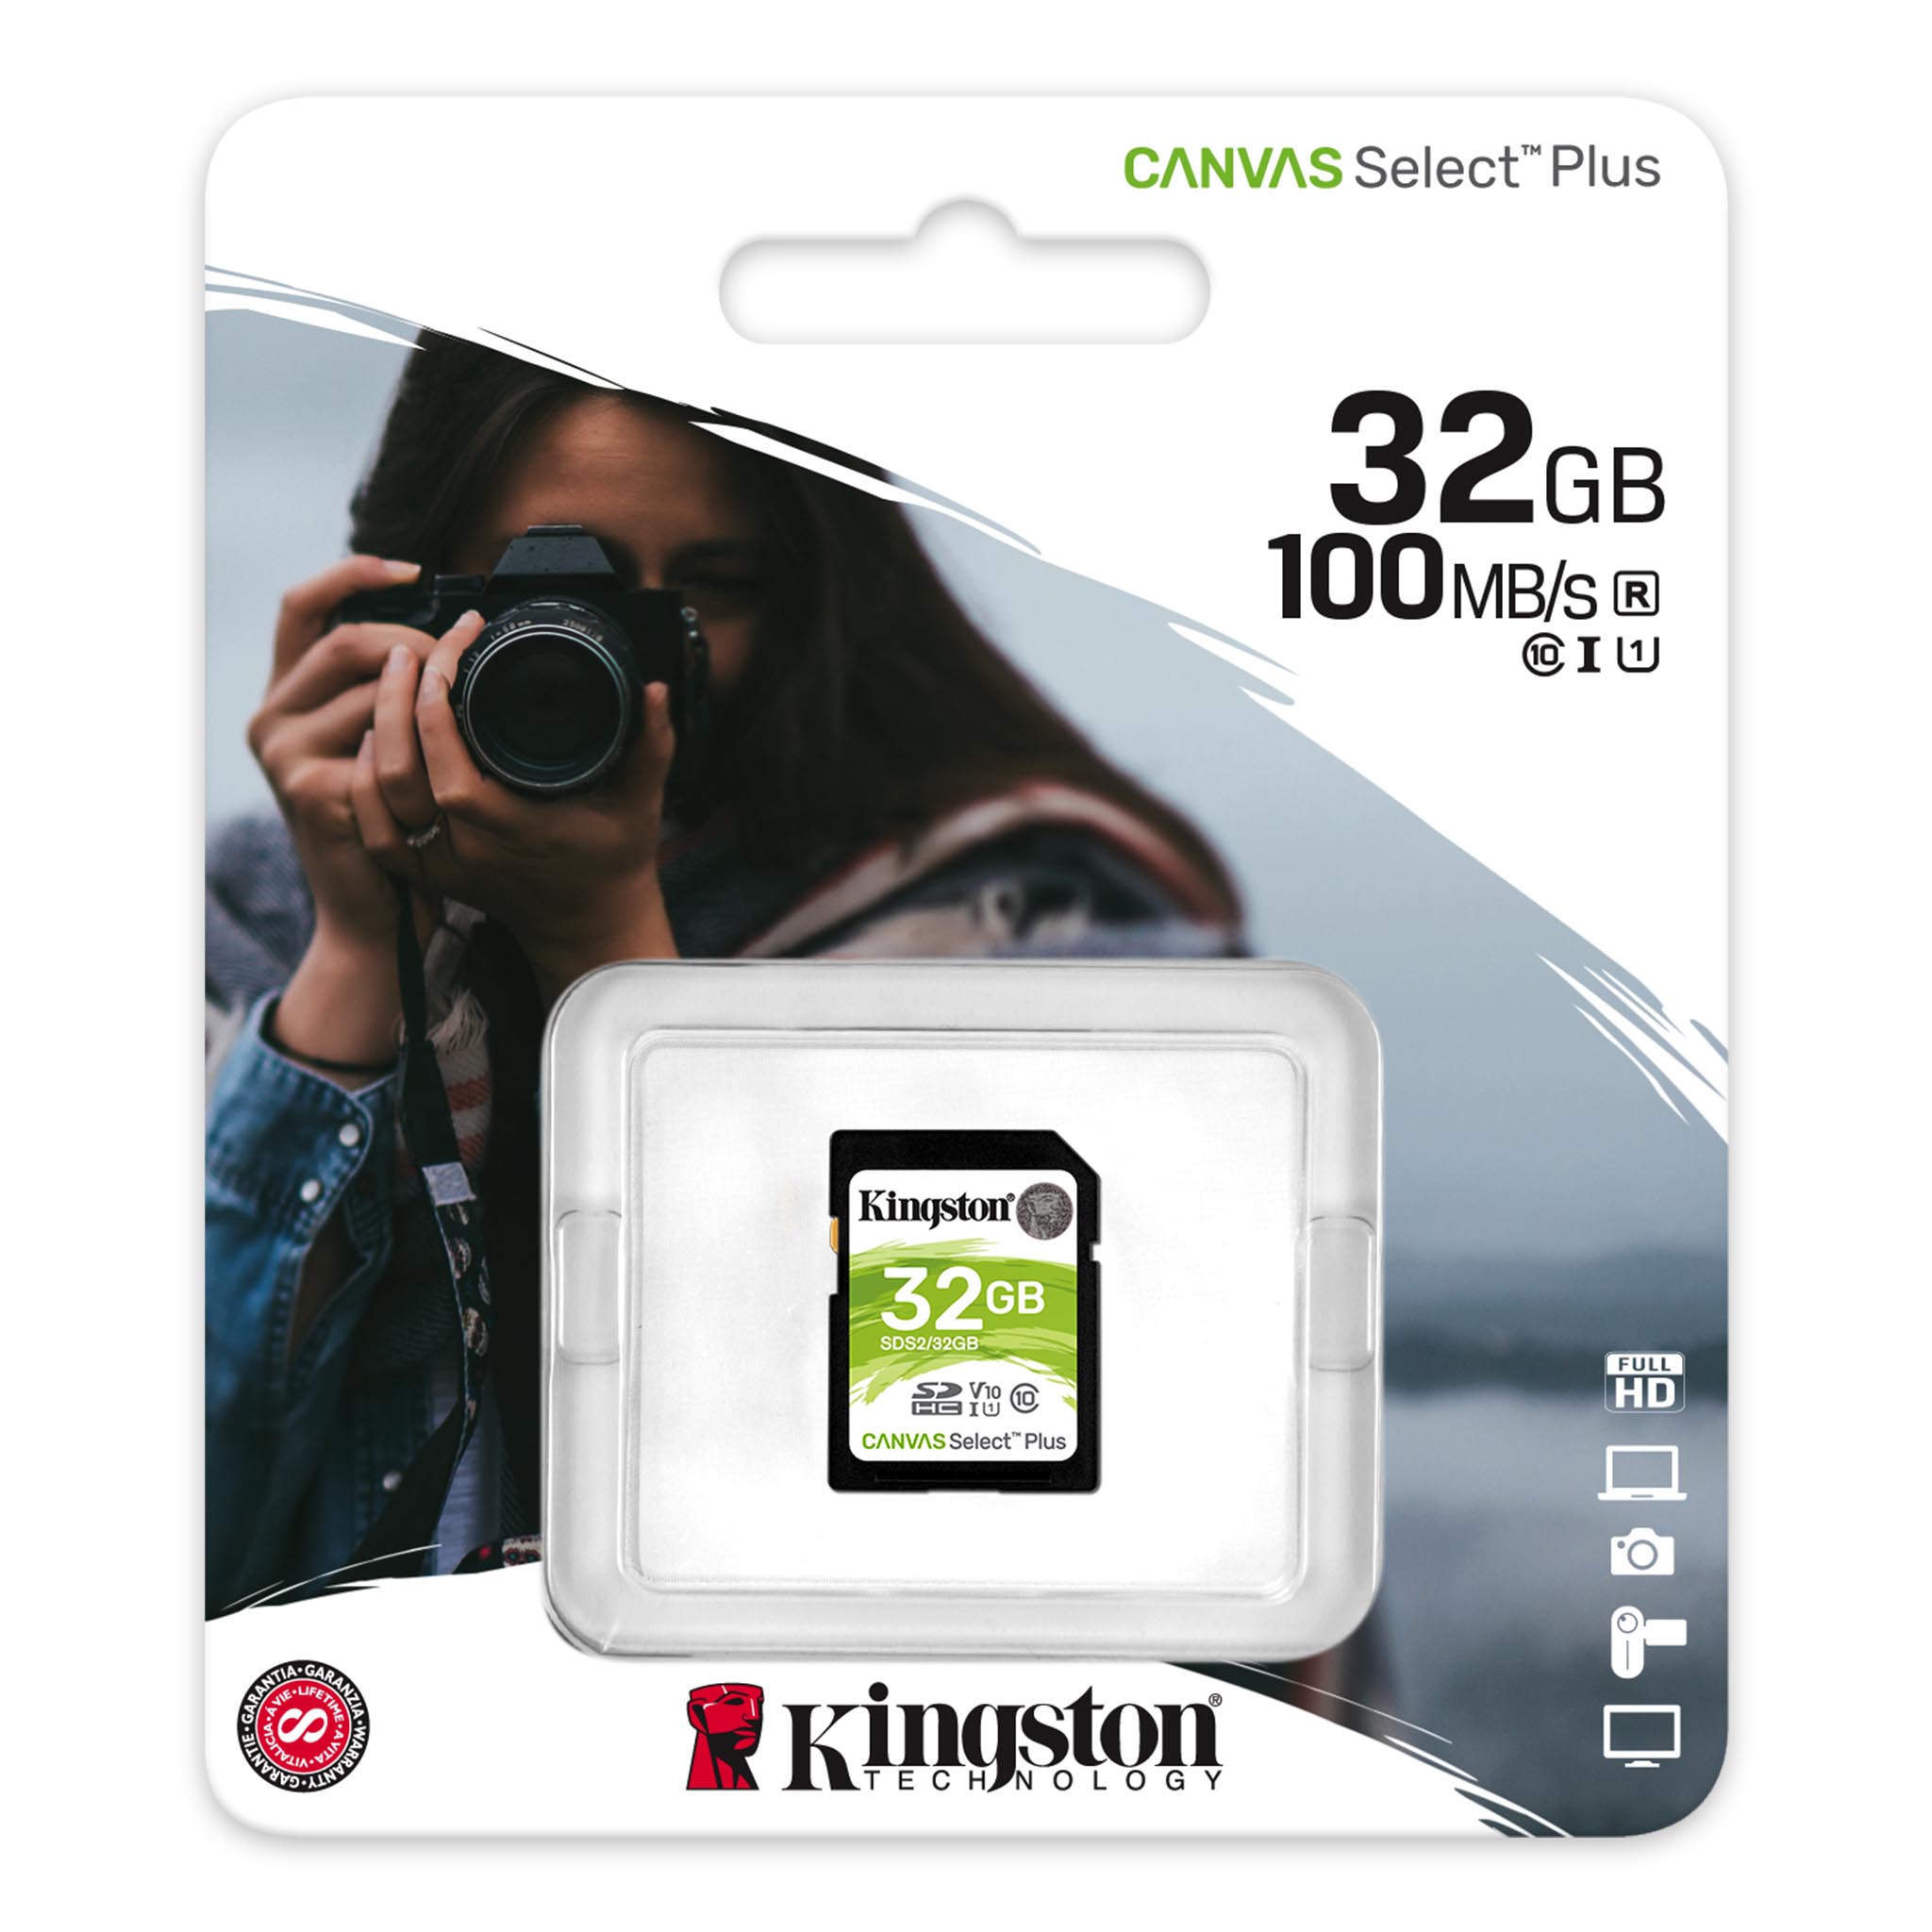 100MBs Works with Kingston Kingston 32GB Alcatel OneTouch Idol 2 S MicroSDHC Canvas Select Plus Card Verified by SanFlash. 